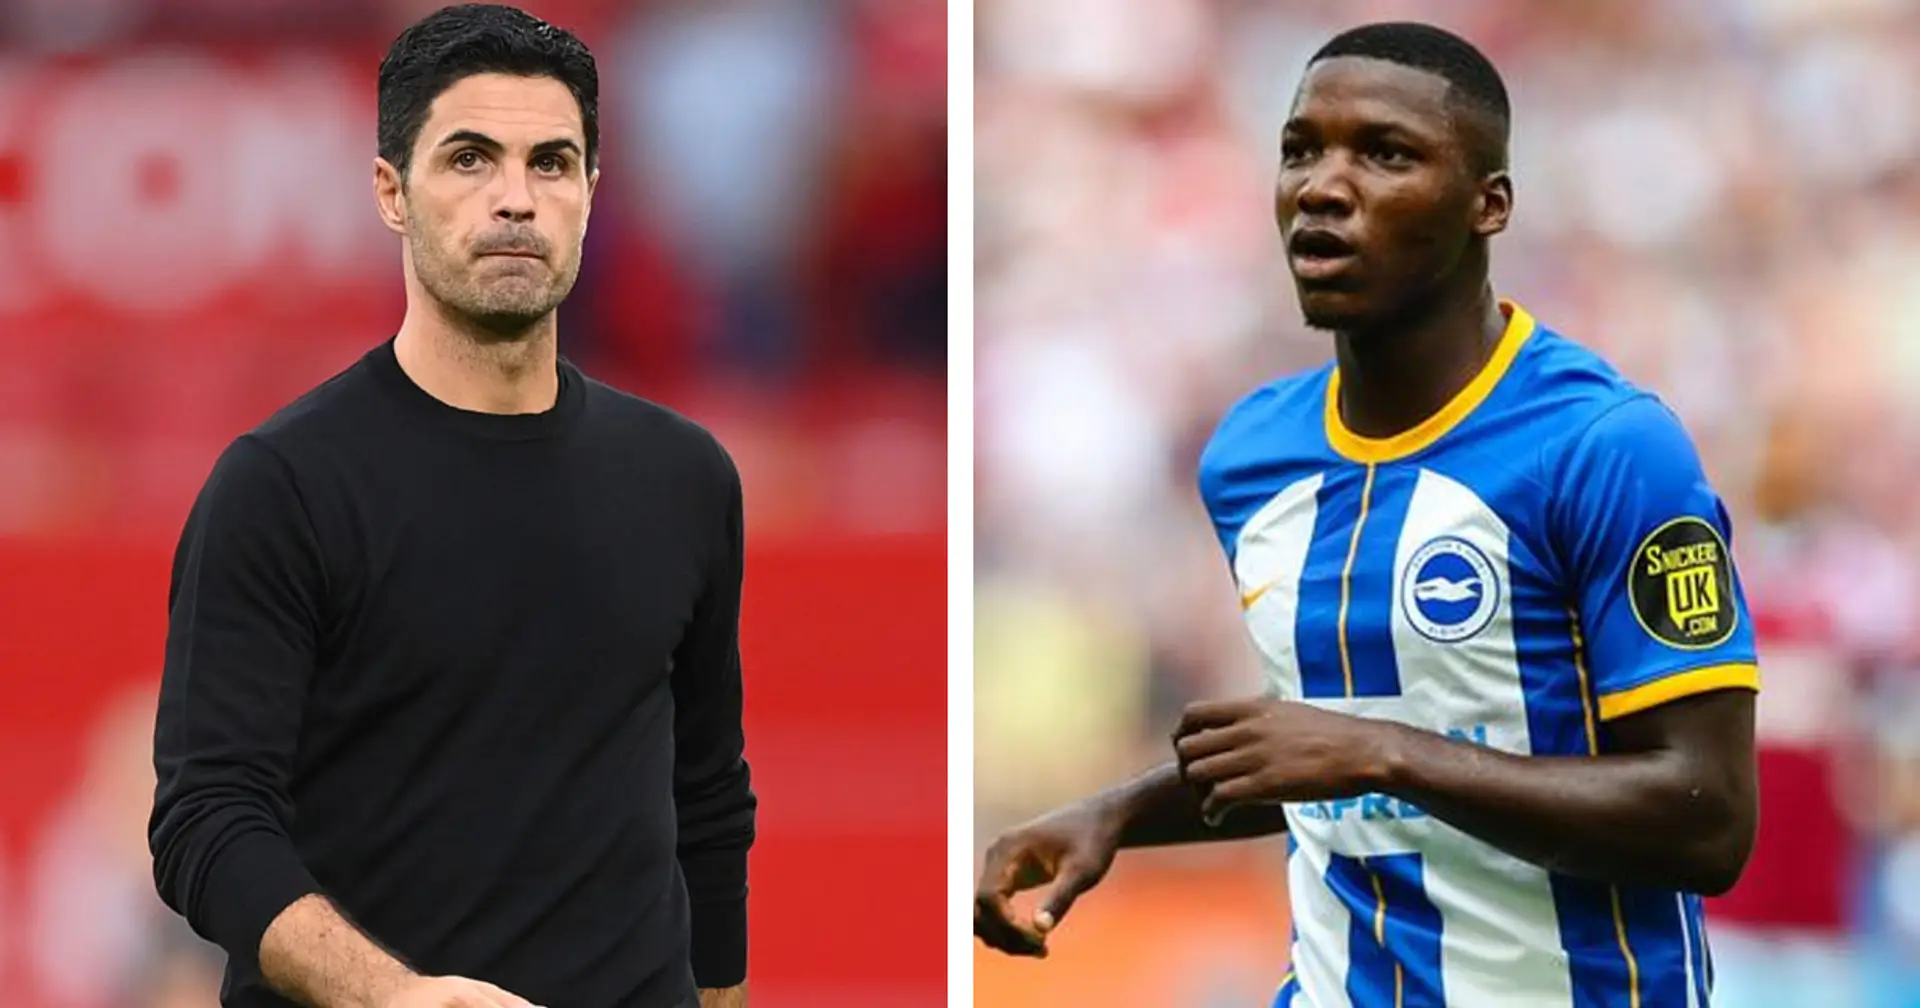 Brighton offering new contract to Arsenal-linked Caicedo & 3 more big stories you might've missed